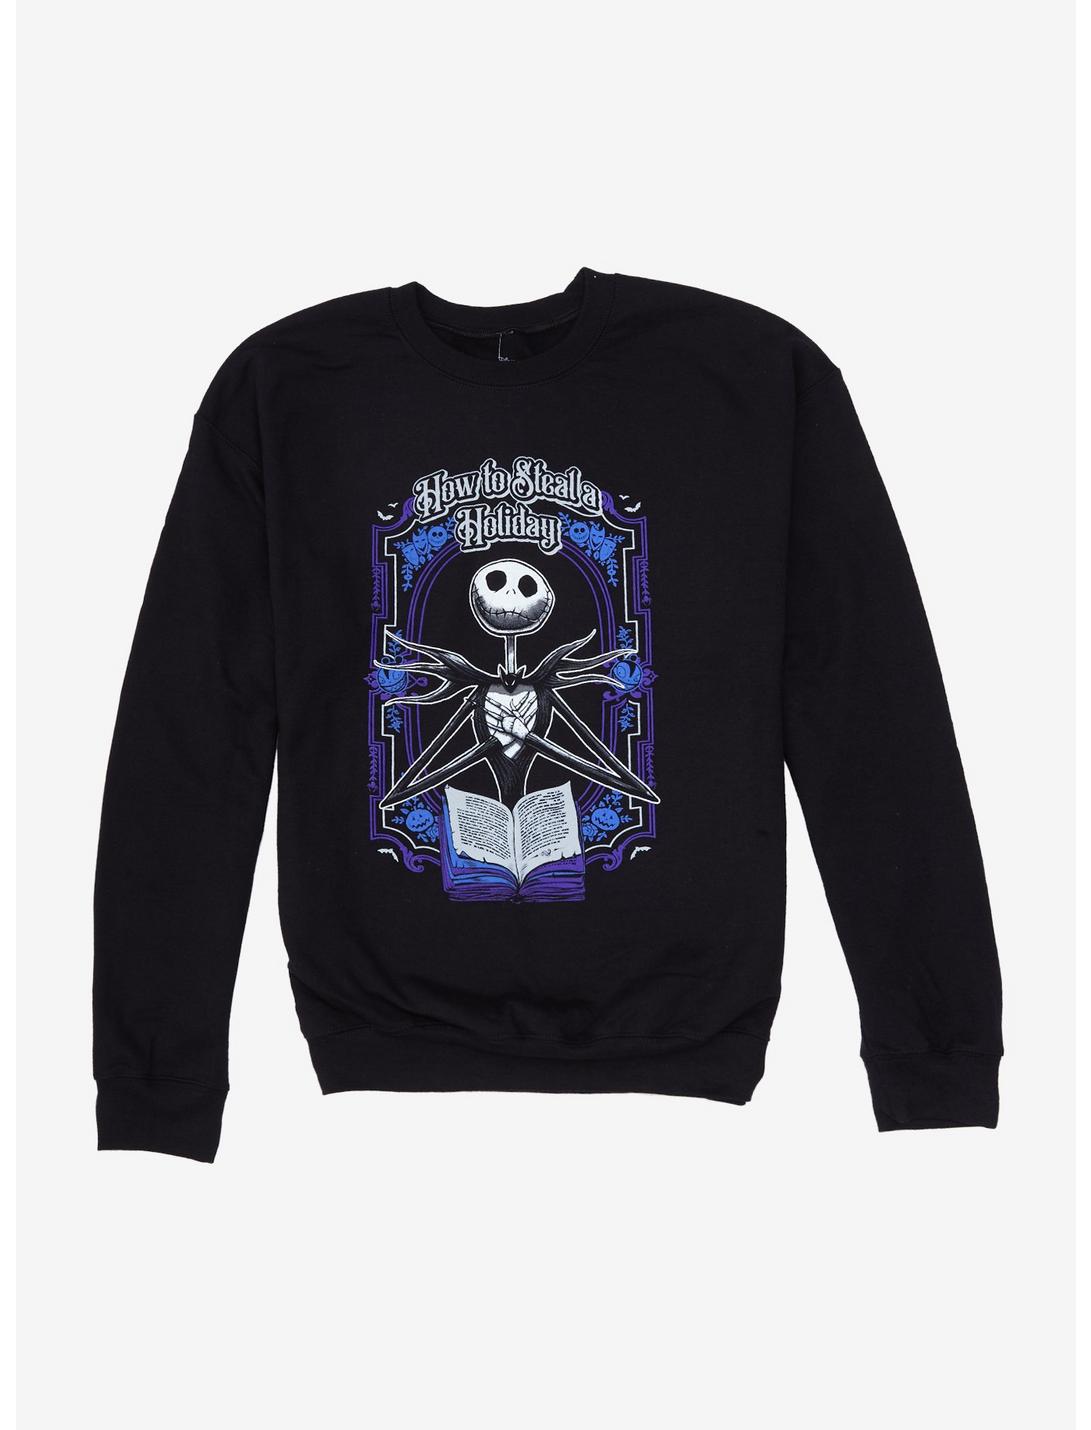 The Nightmare Before Christmas How To Steal A Holiday Sweatshirt, MULTI, hi-res